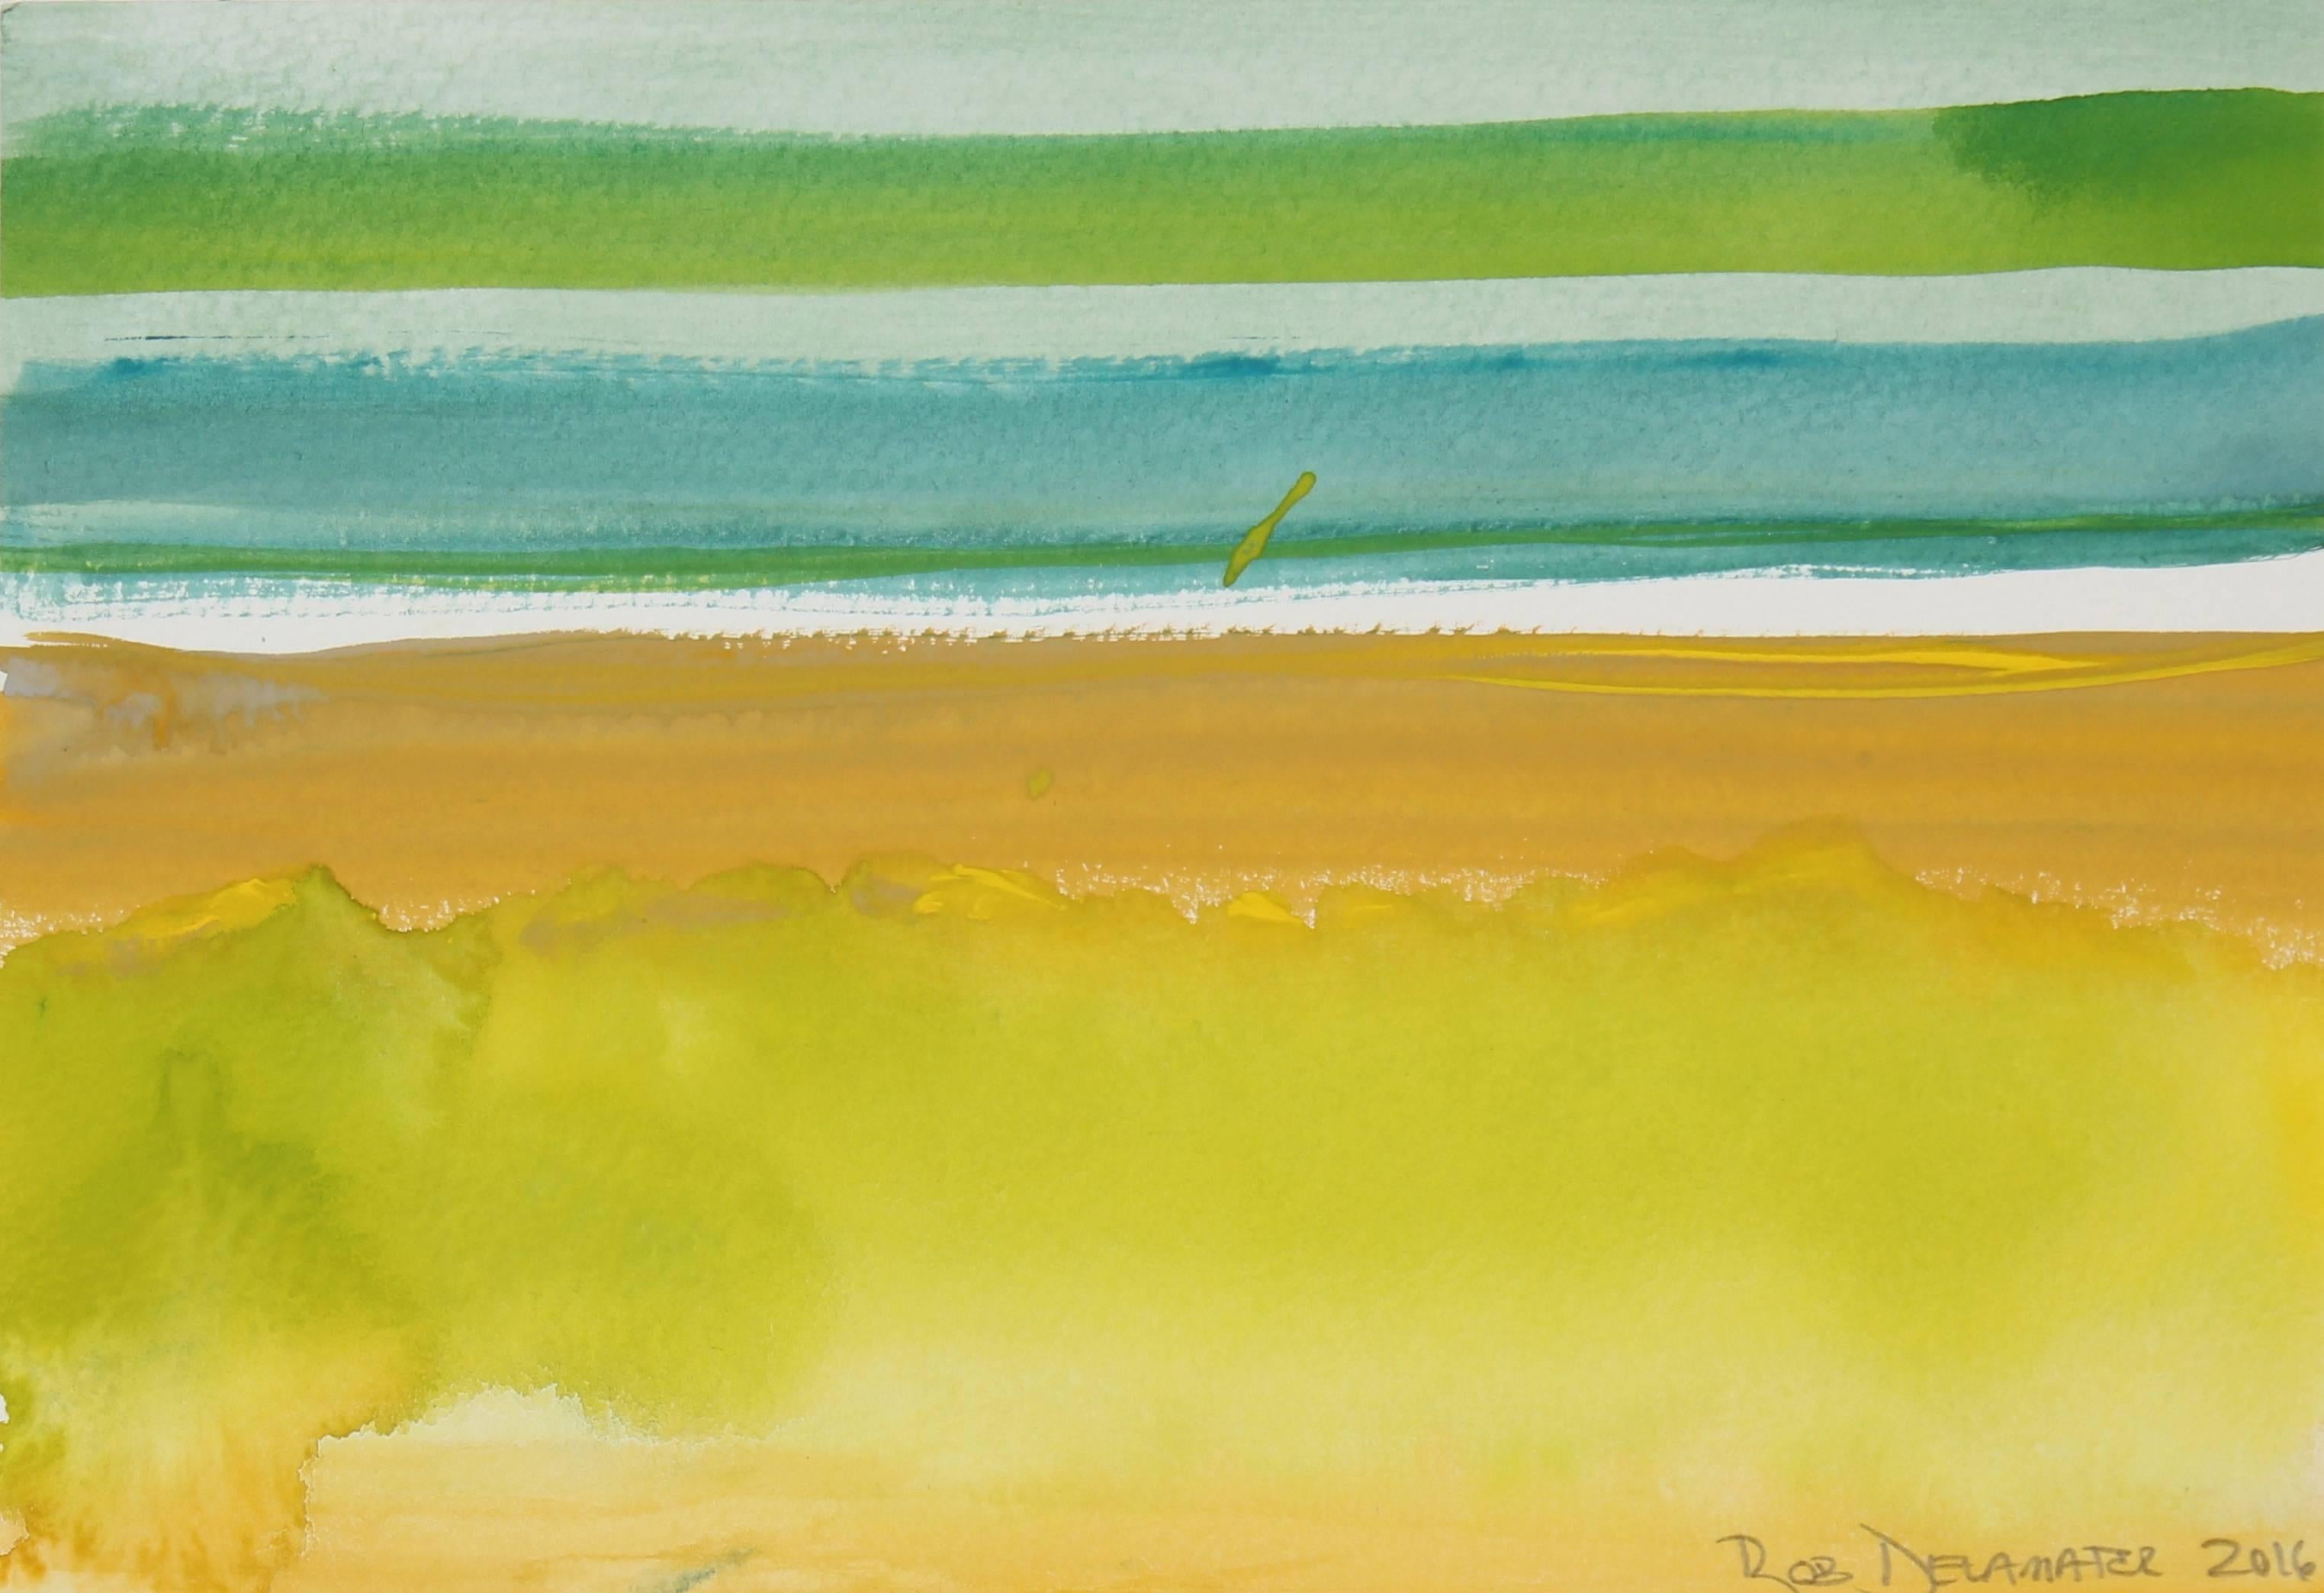 Rob Delamater Abstract Drawing - "Yellow and Green Horizon" Abstracted Landscape In Gouache, 2016